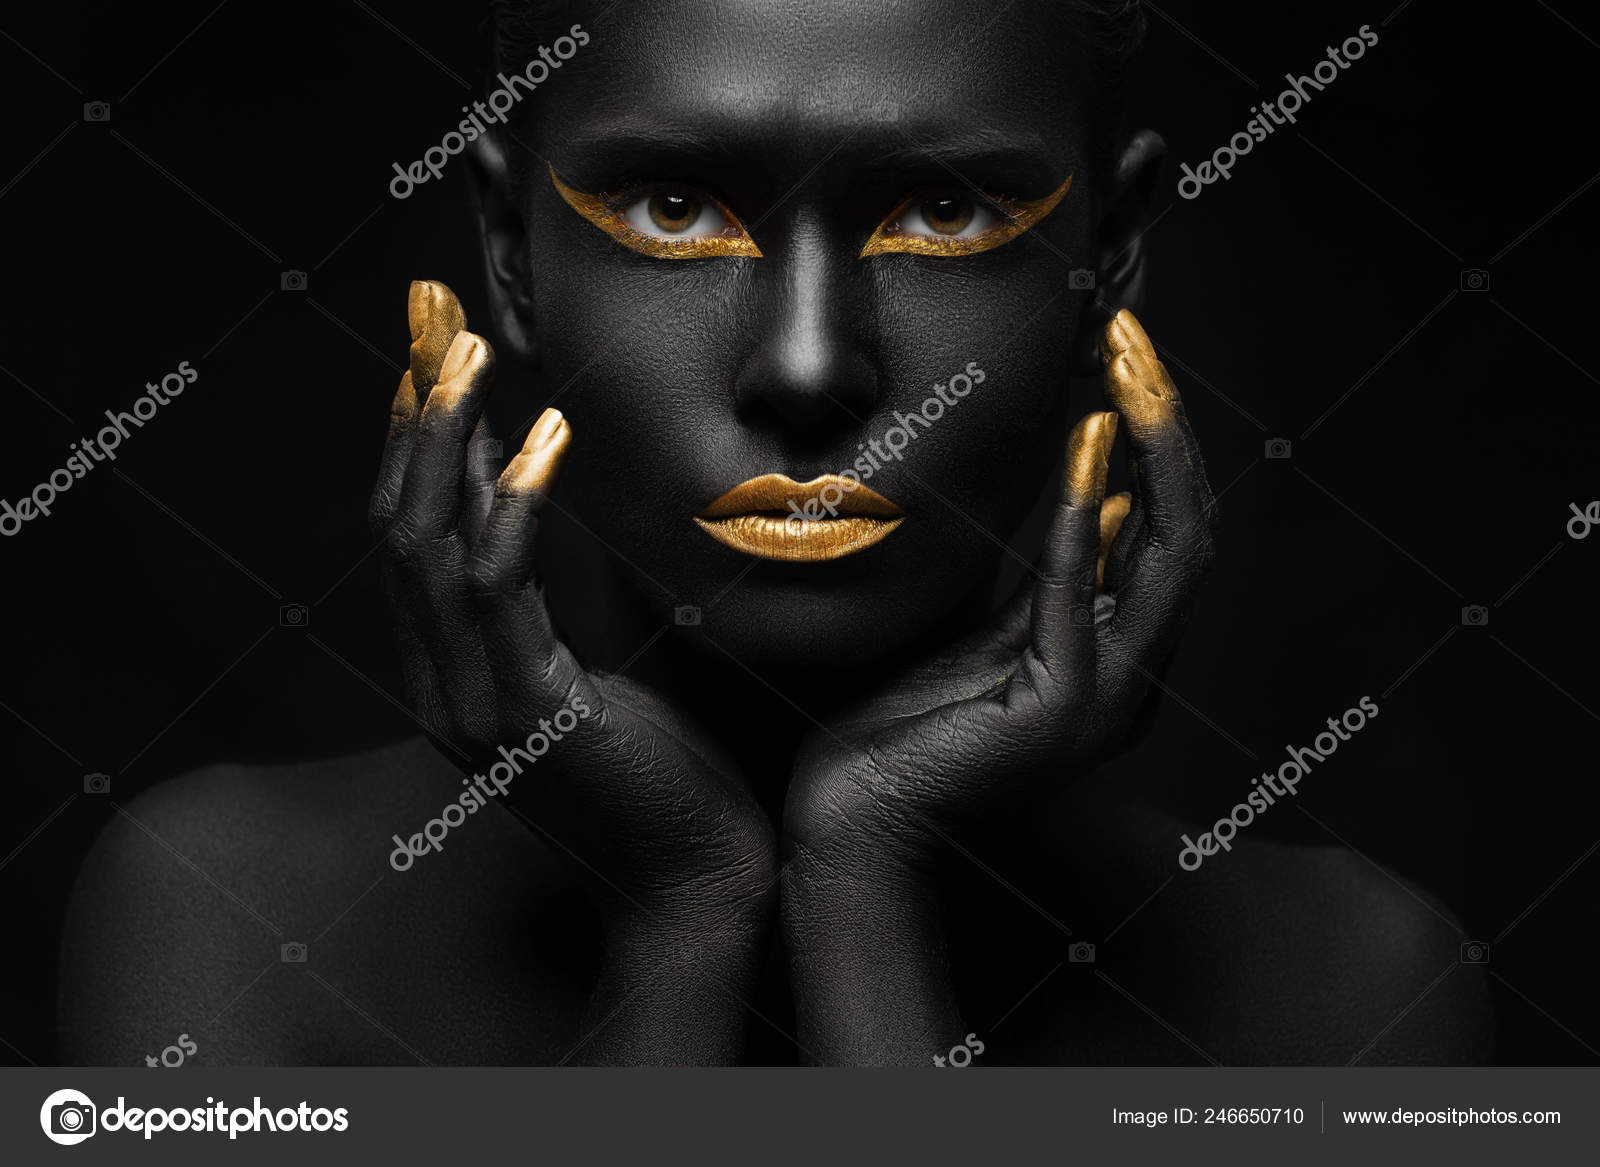 Black Background Black Woman Chic Gold Makeup Stock Photo by ...